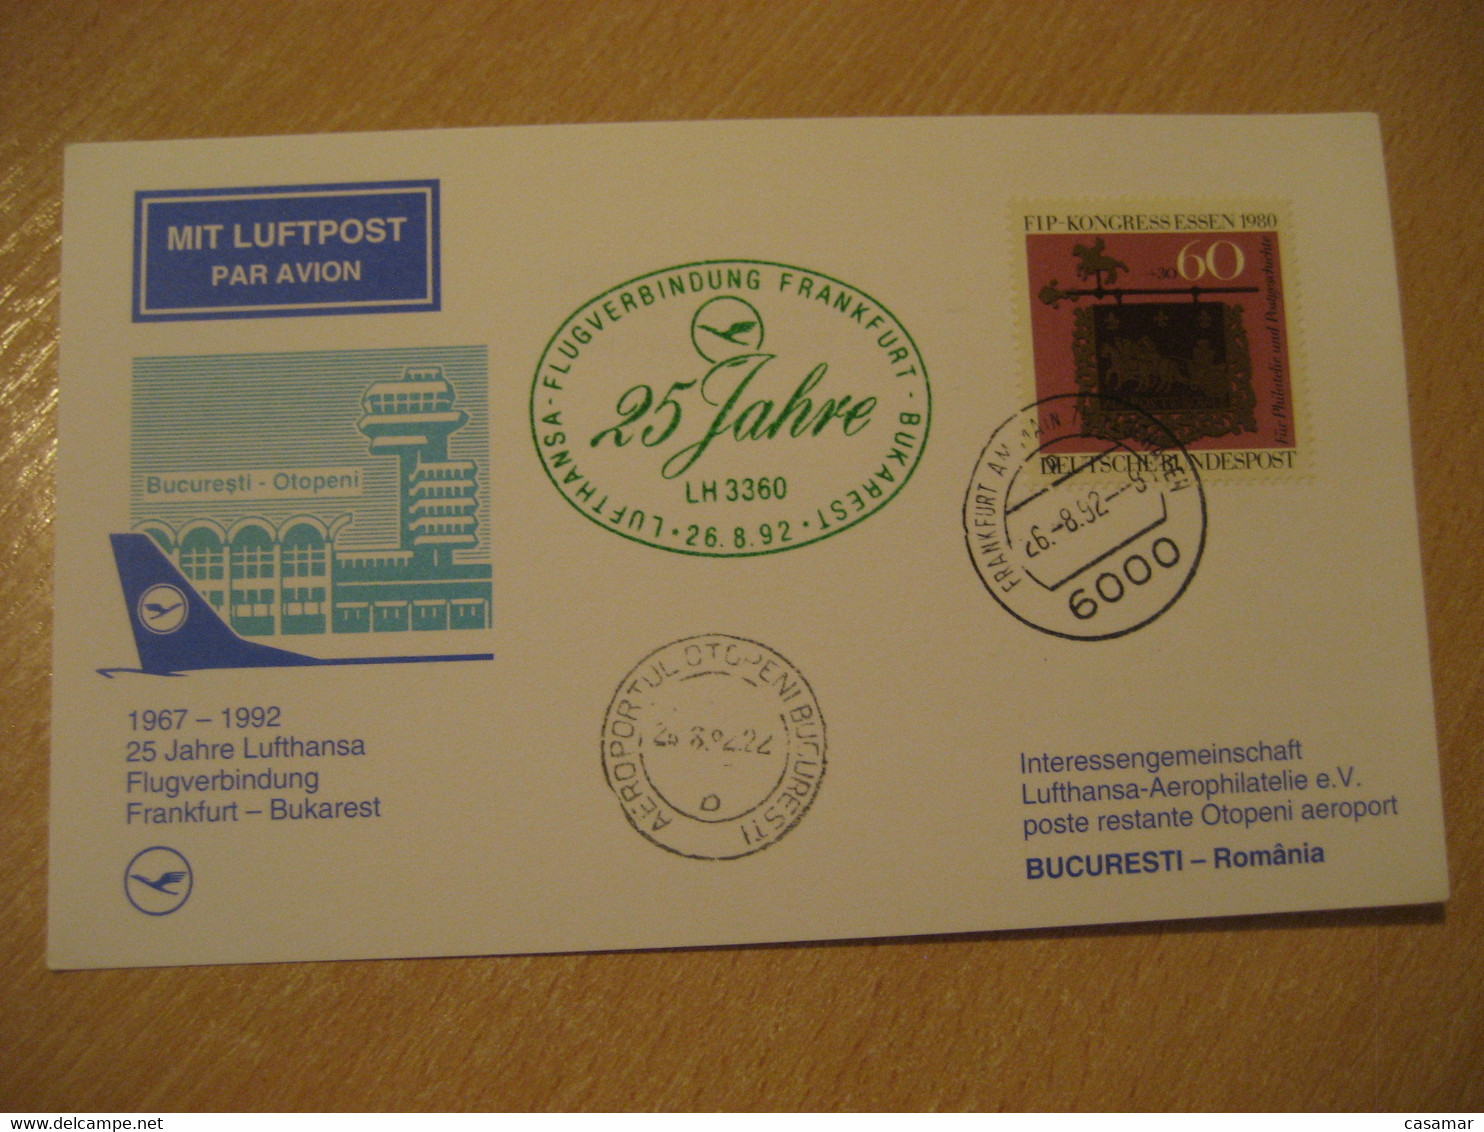 BUCHAREST Frankfurt 1992 Lufthansa Airlines Airline 25 Year First Flight Green Cancel Card ROMANIA GERMANY - Lettres & Documents